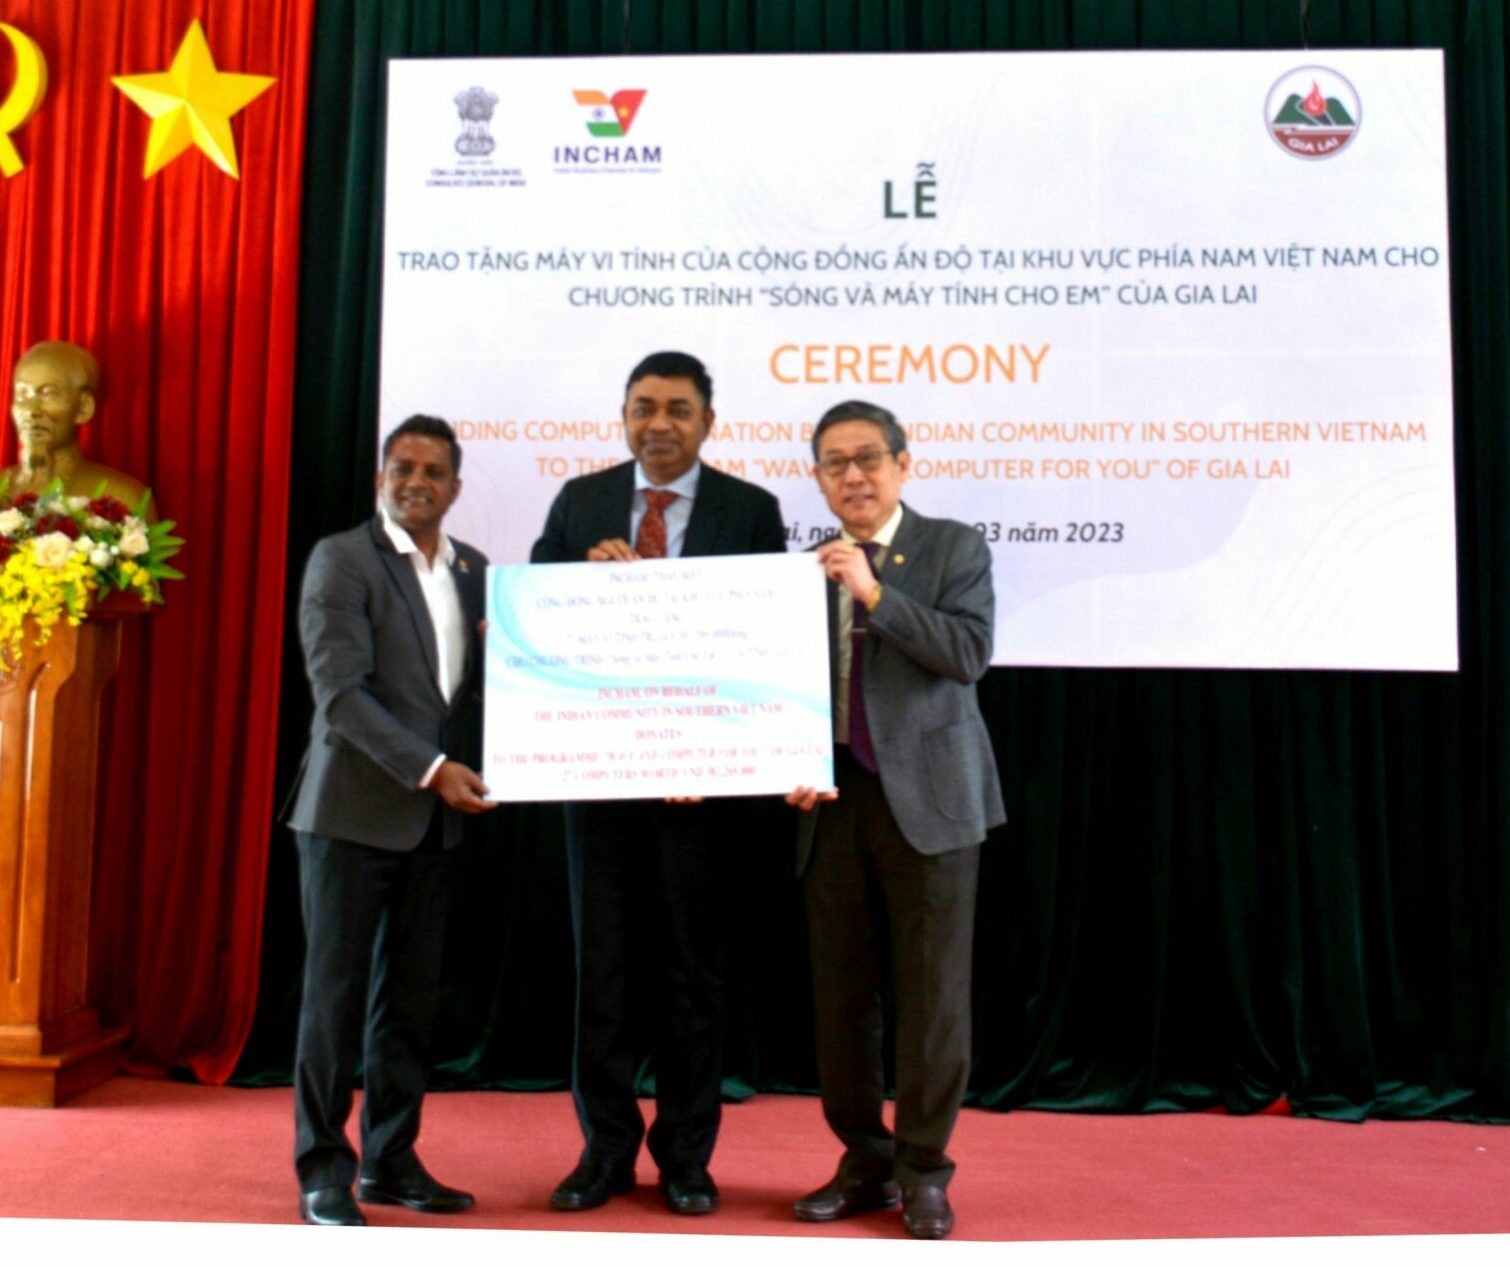 Ceremony of handing computer donation by the Indian community to the program “Wave and Computer for you” of Gia Lai